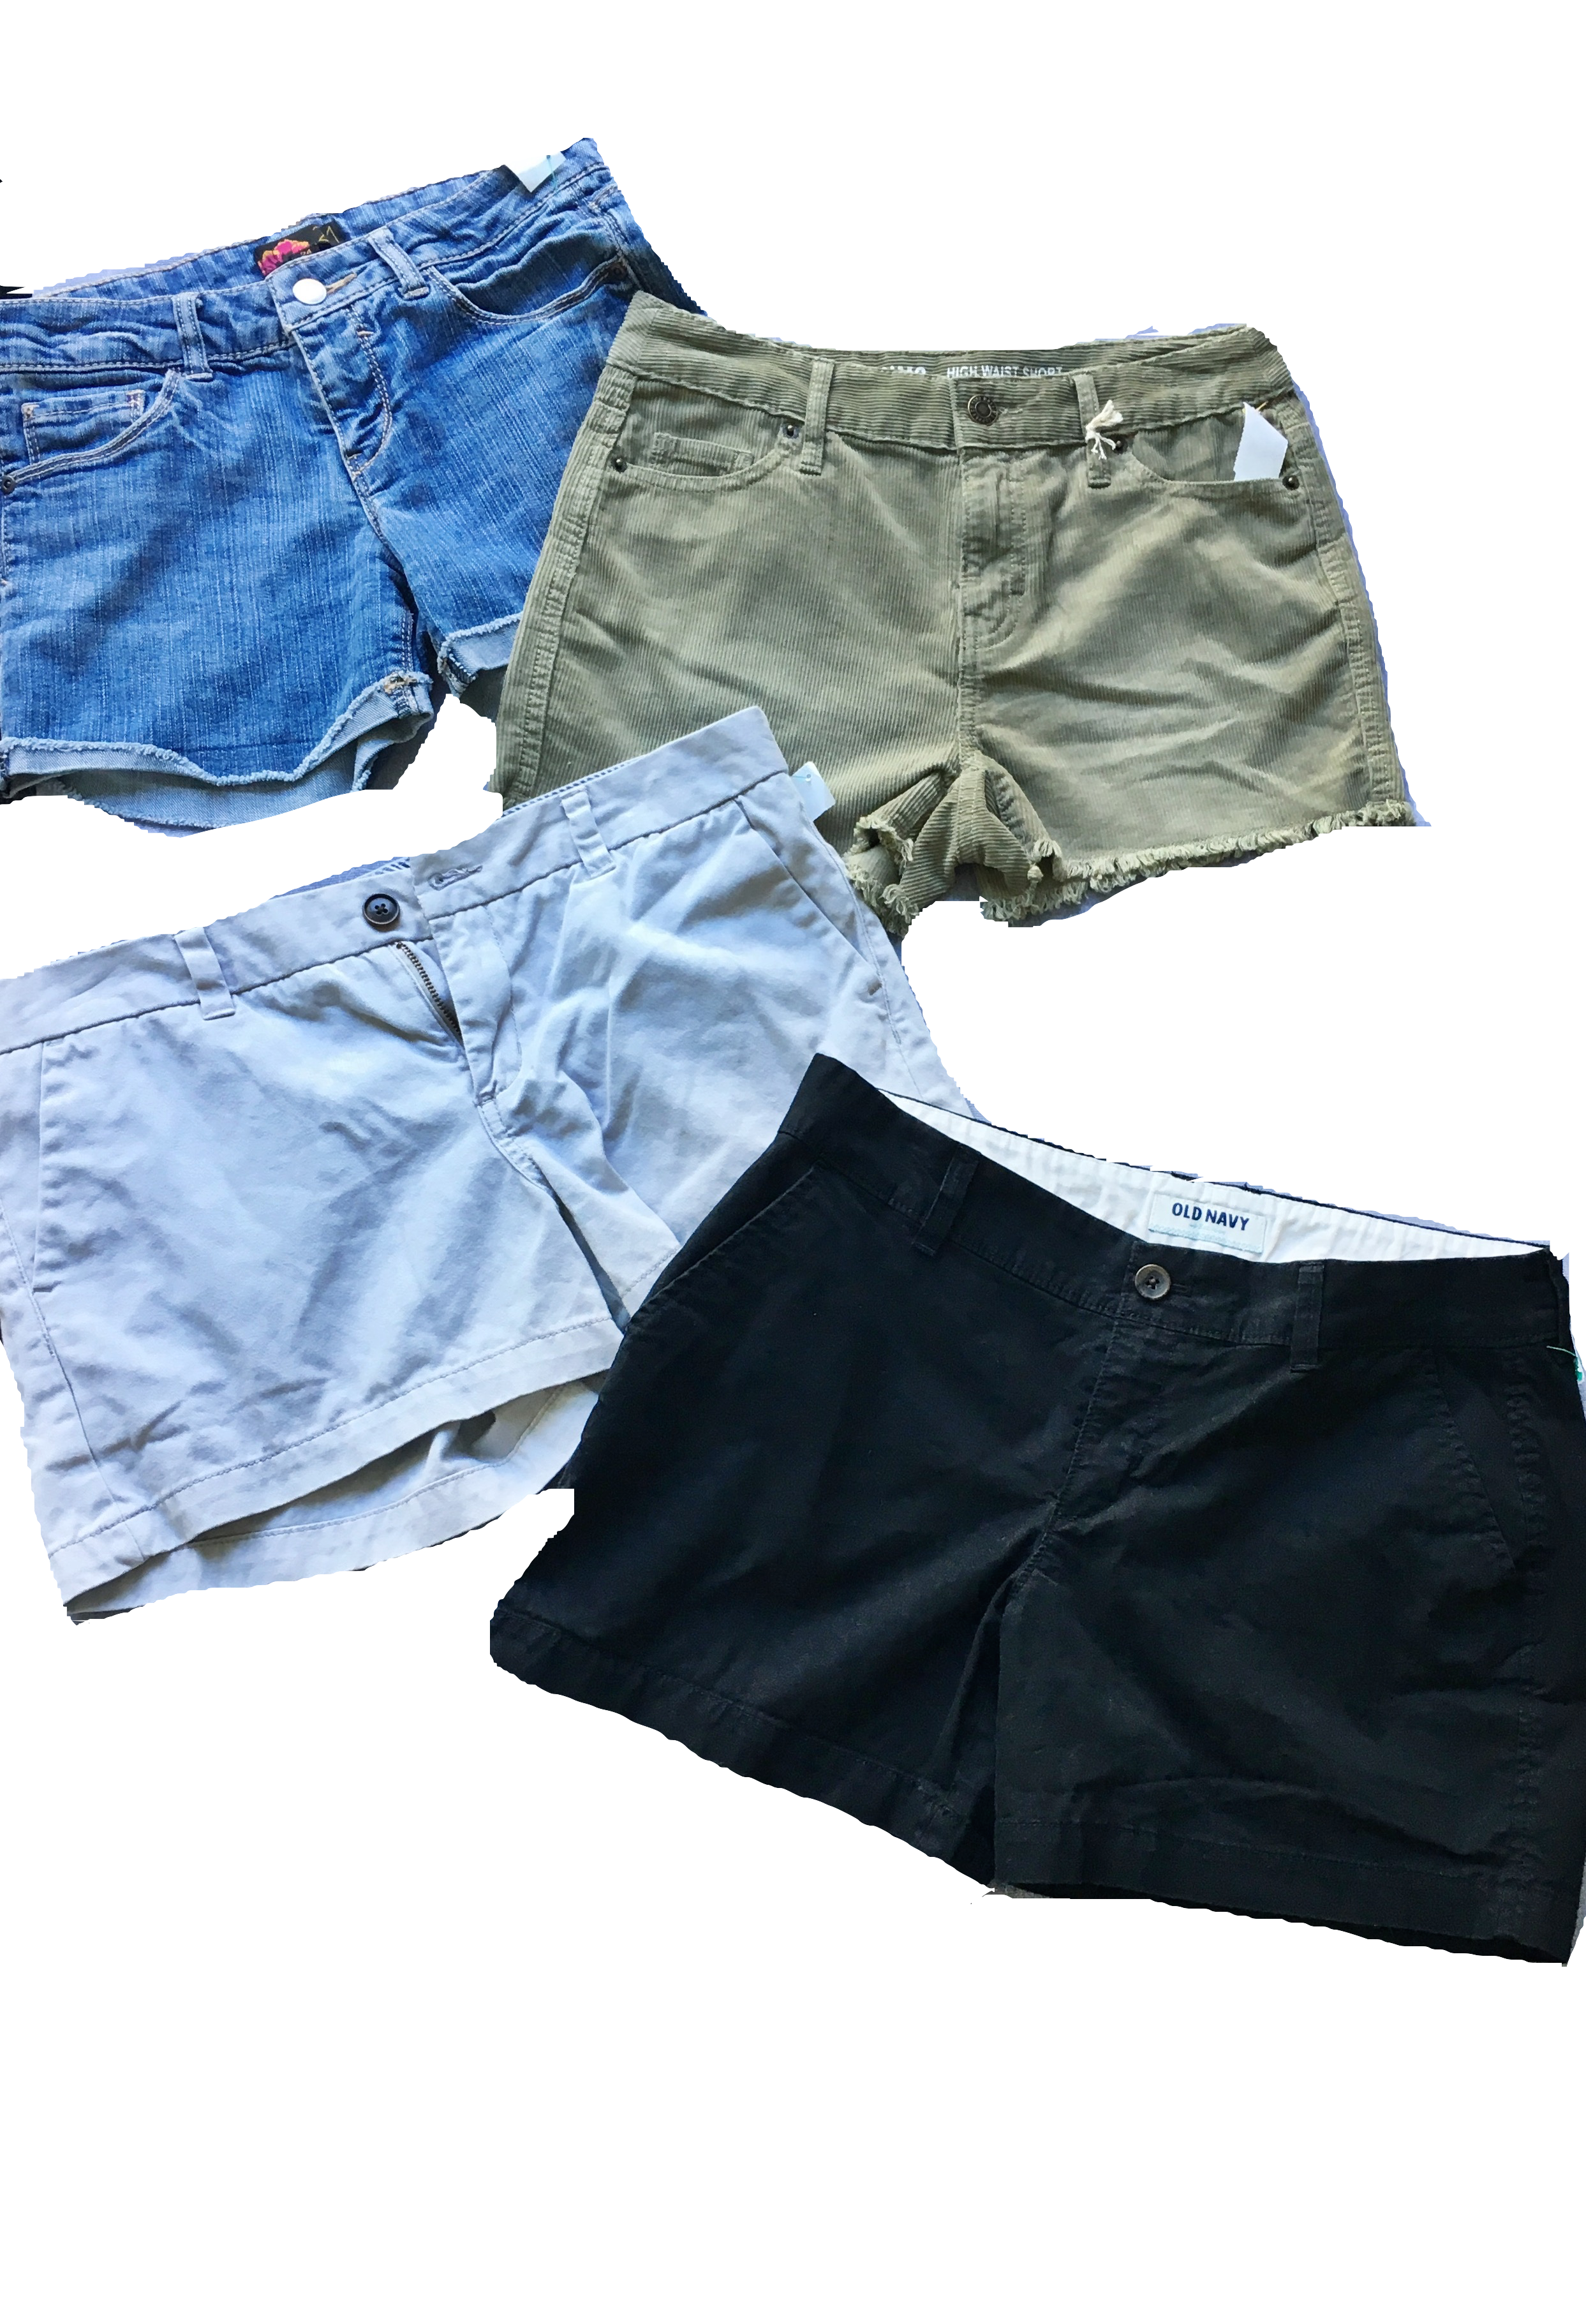 No Short Age Of Shorts At Ocgoodwill Goodwill Of Orange County Blog